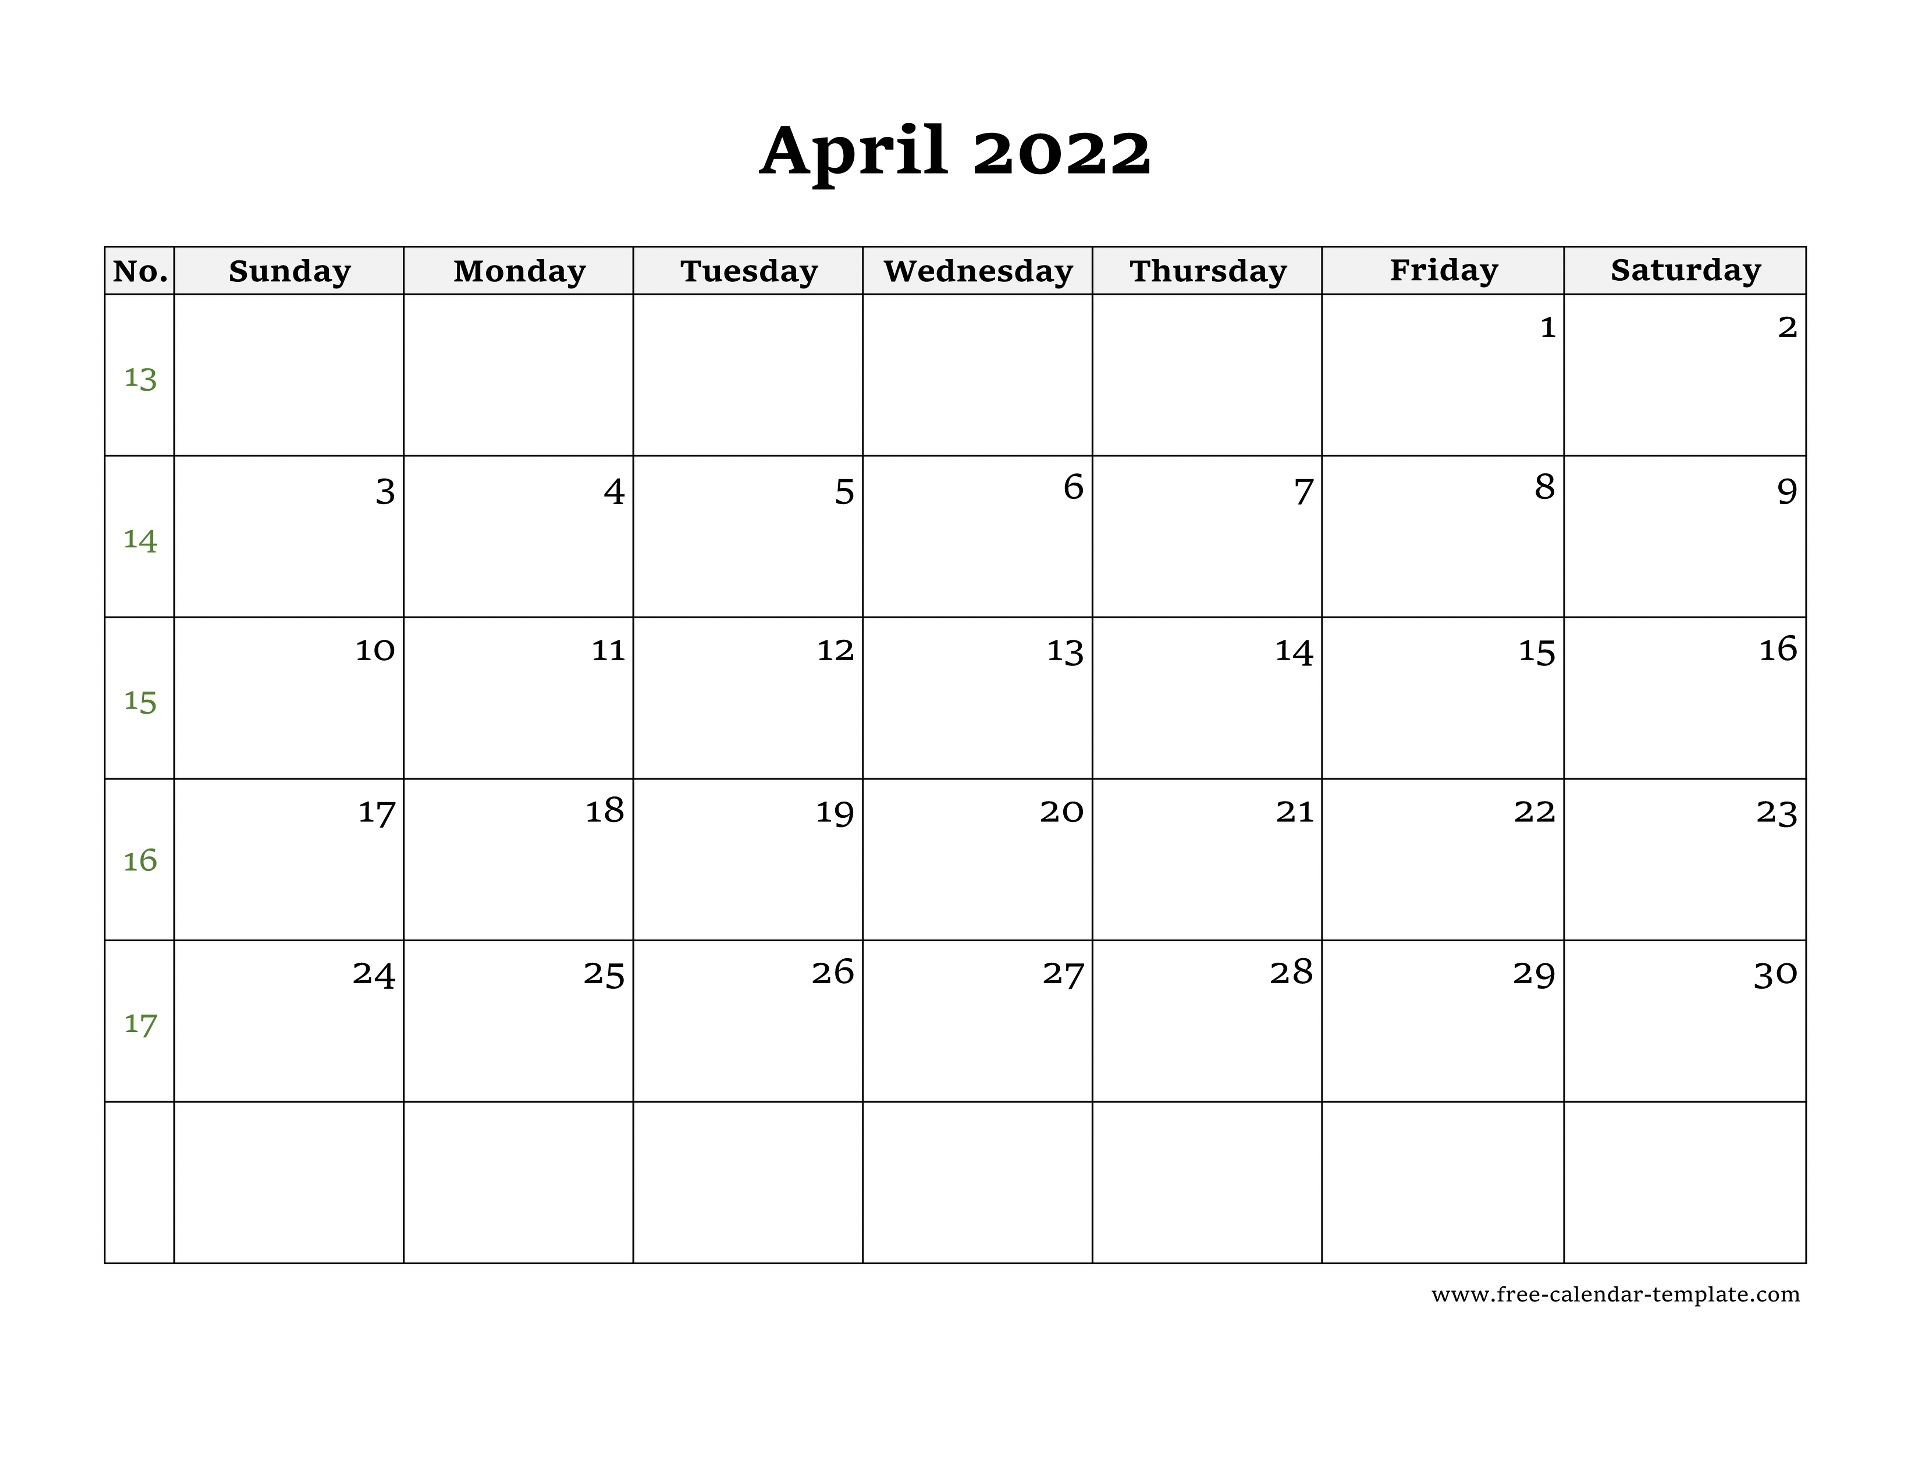 Simple April Calendar 2022 Large Box On Each Day For Notes  November 2022 To April 2022 Calendar